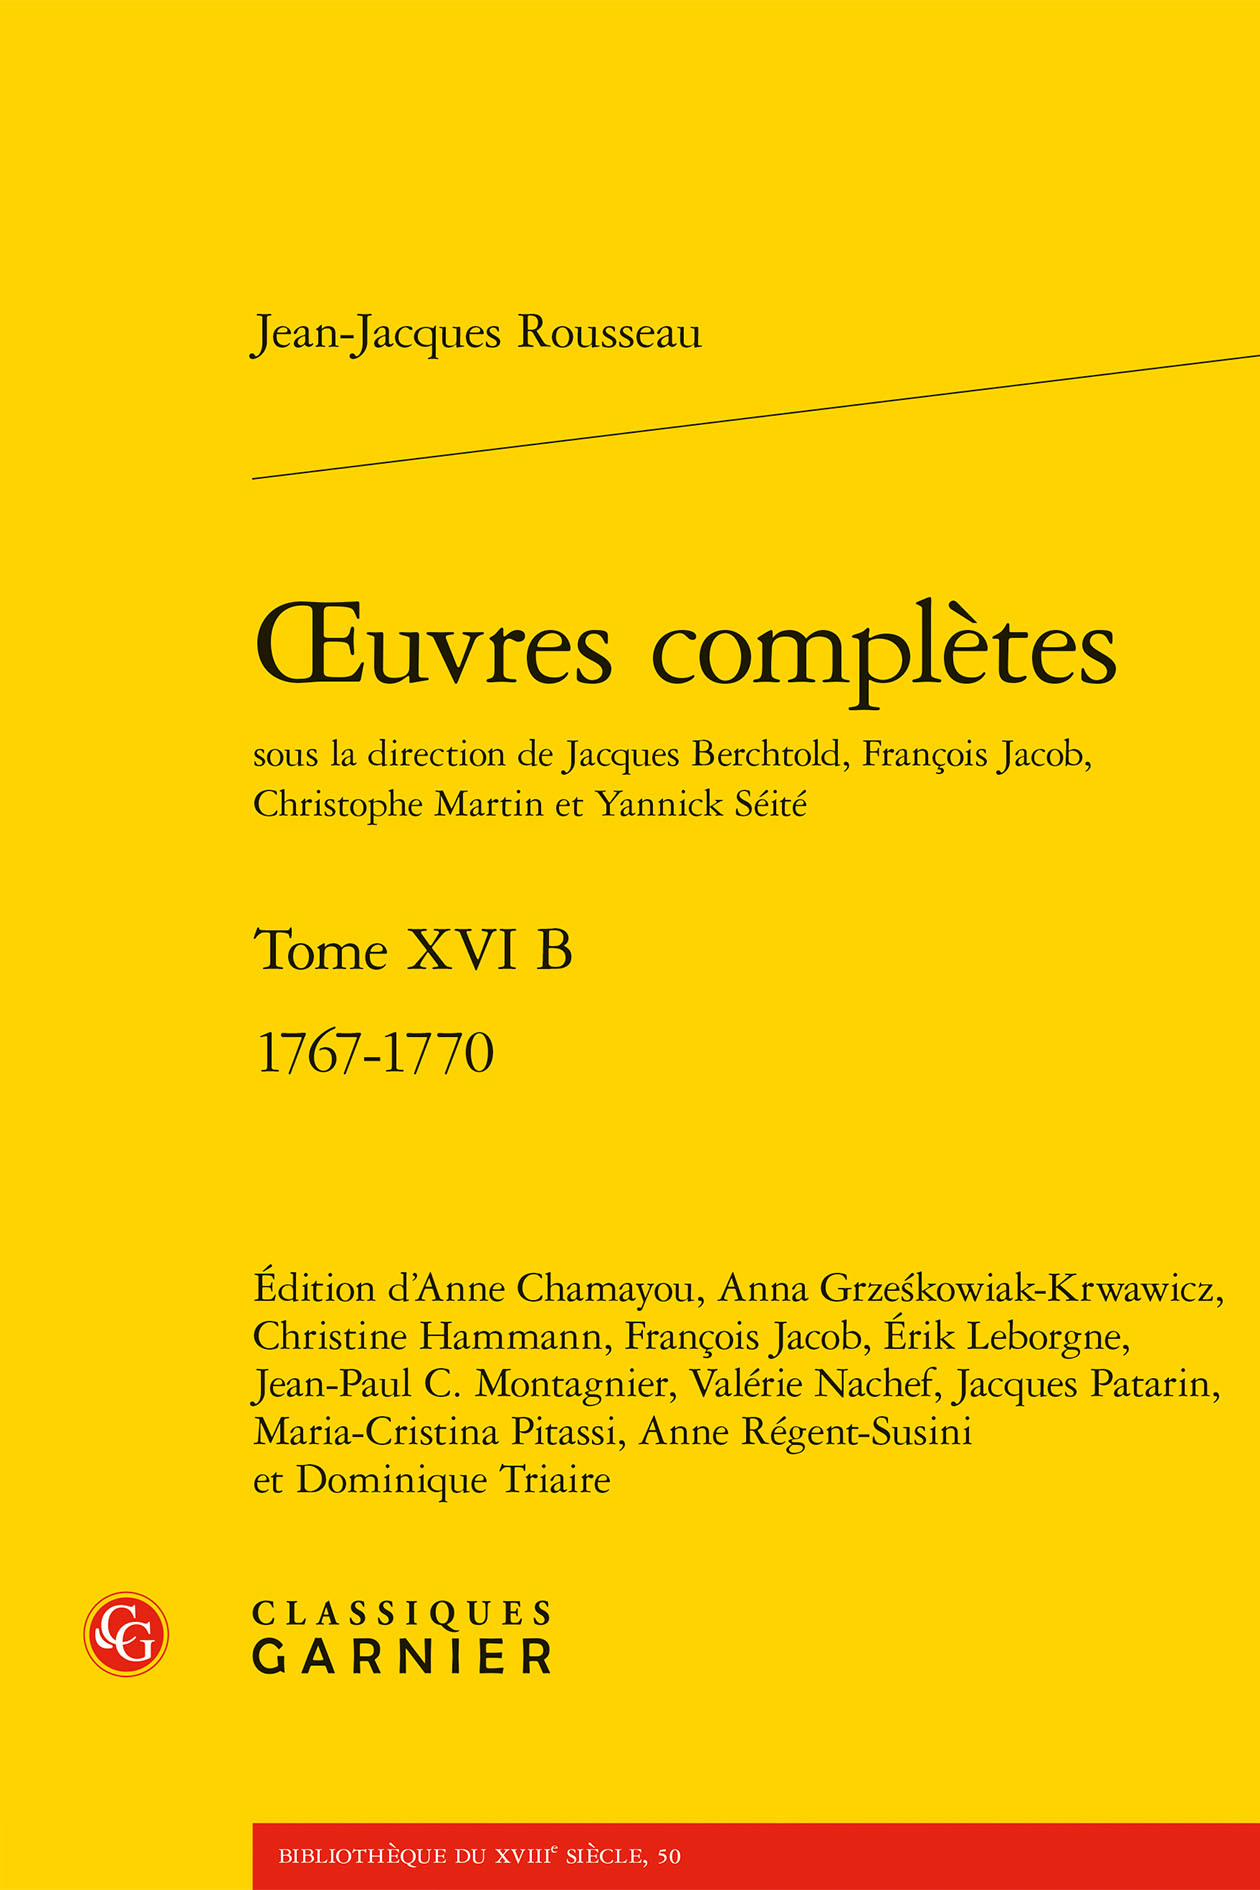 oeuvres complètes, 1767-1770 (9782406107811-front-cover)